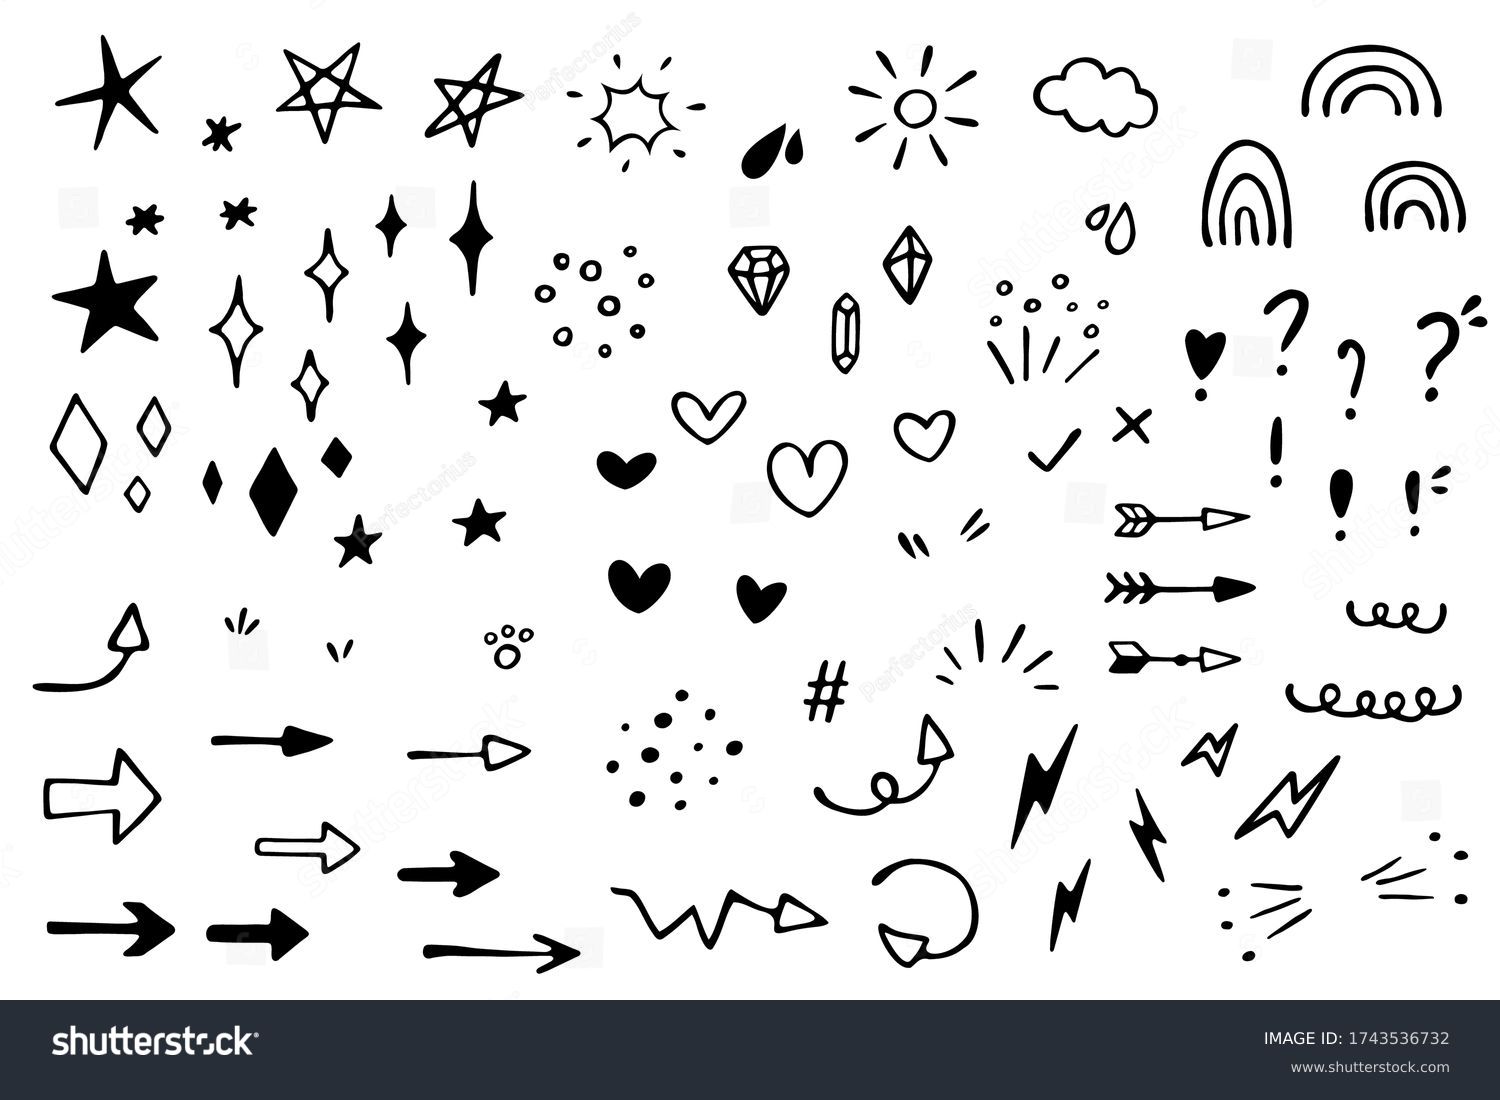 Vector set of different stars, sparkles, arrows, hearts, diamonds, signs and symbols. Hand drawn, doodle elements isolated on white background #1743536732